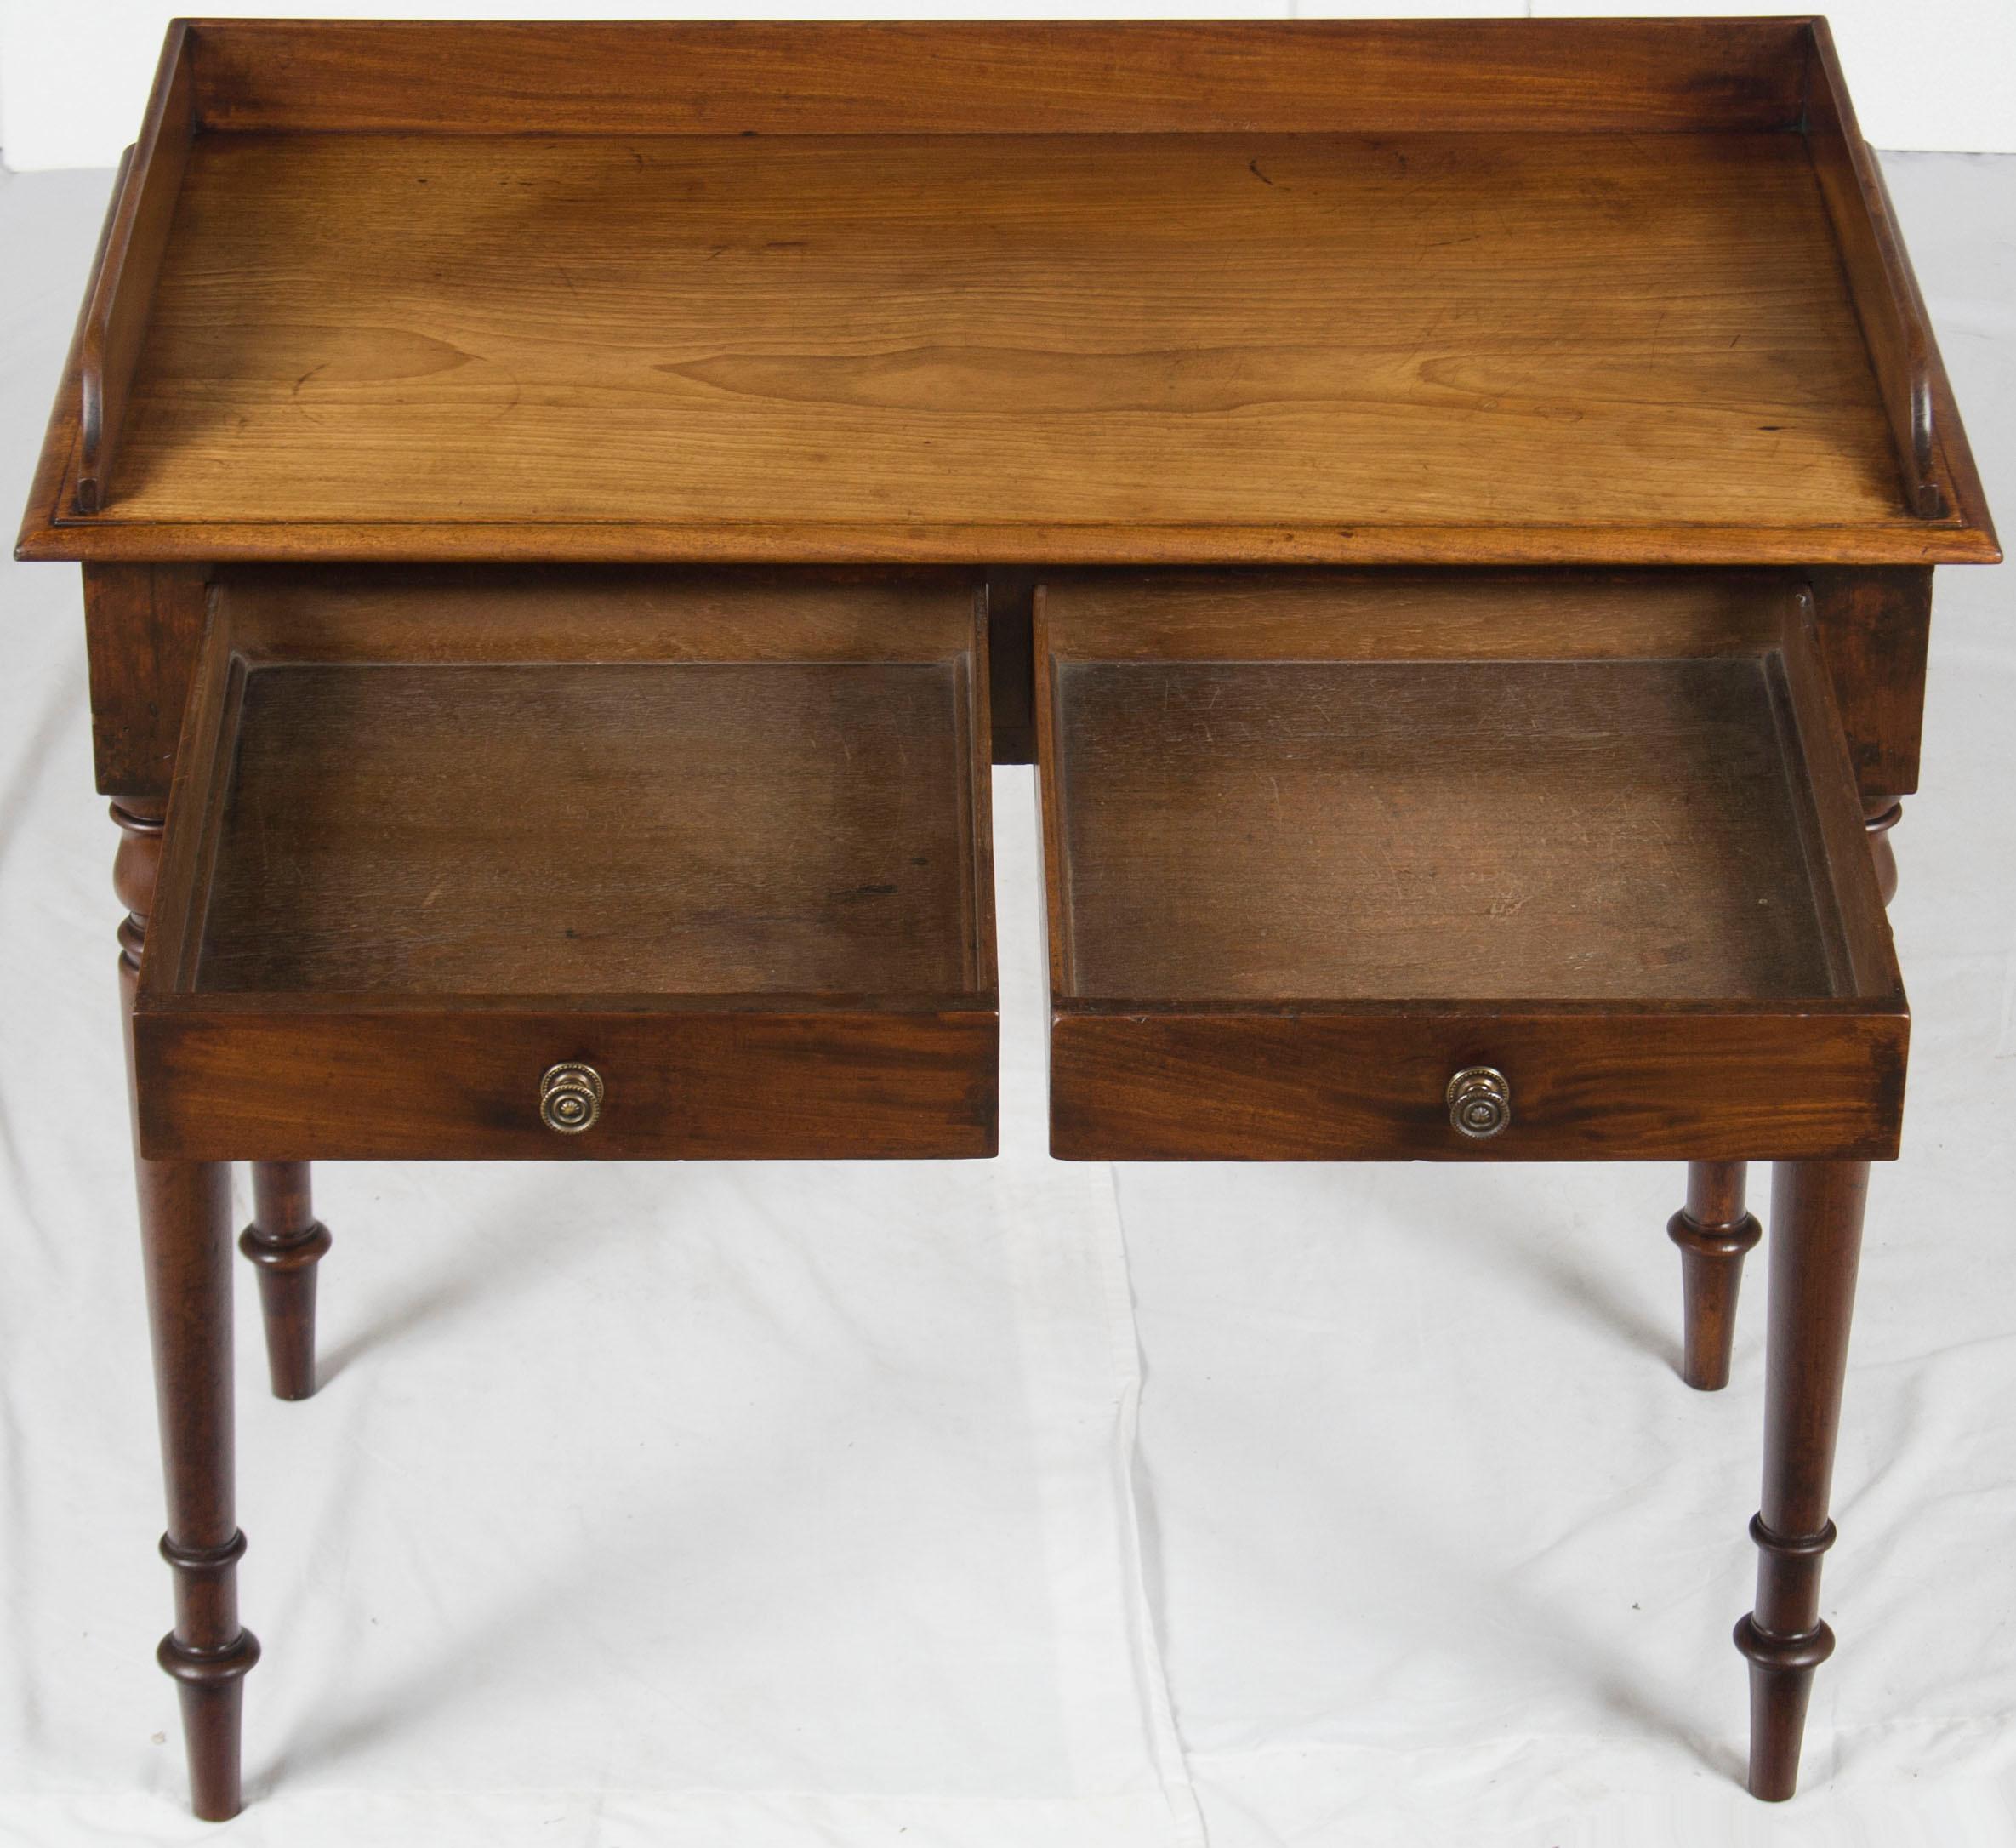 Fresh over from England, this small side desk provides function in tiny spaces. Probably made sometime, circa 1890, this piece works equally well in both the office, bedroom, or living room. Whether used to compliment an existing desk or provide a